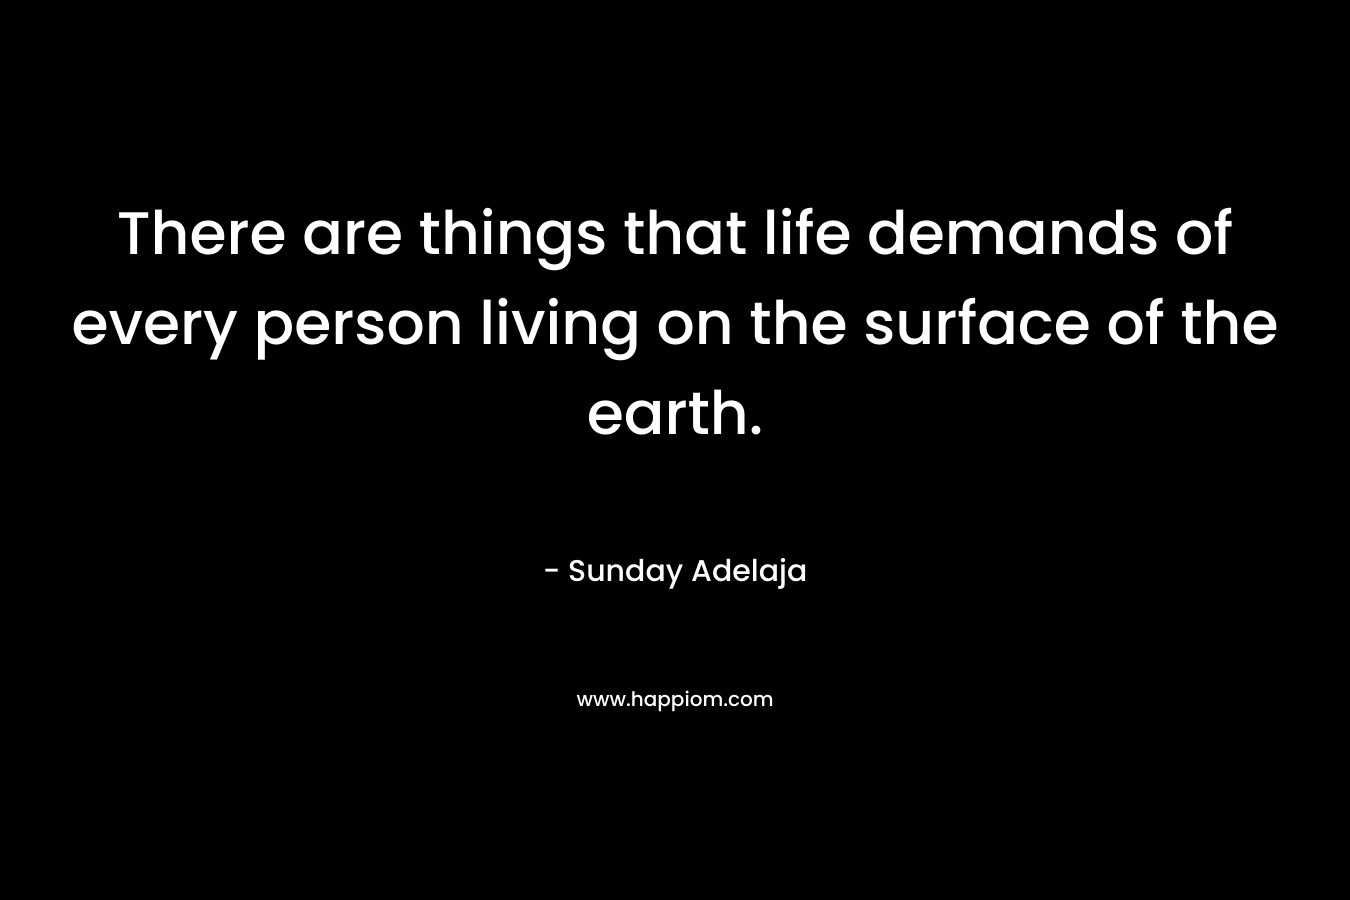 There are things that life demands of every person living on the surface of the earth.